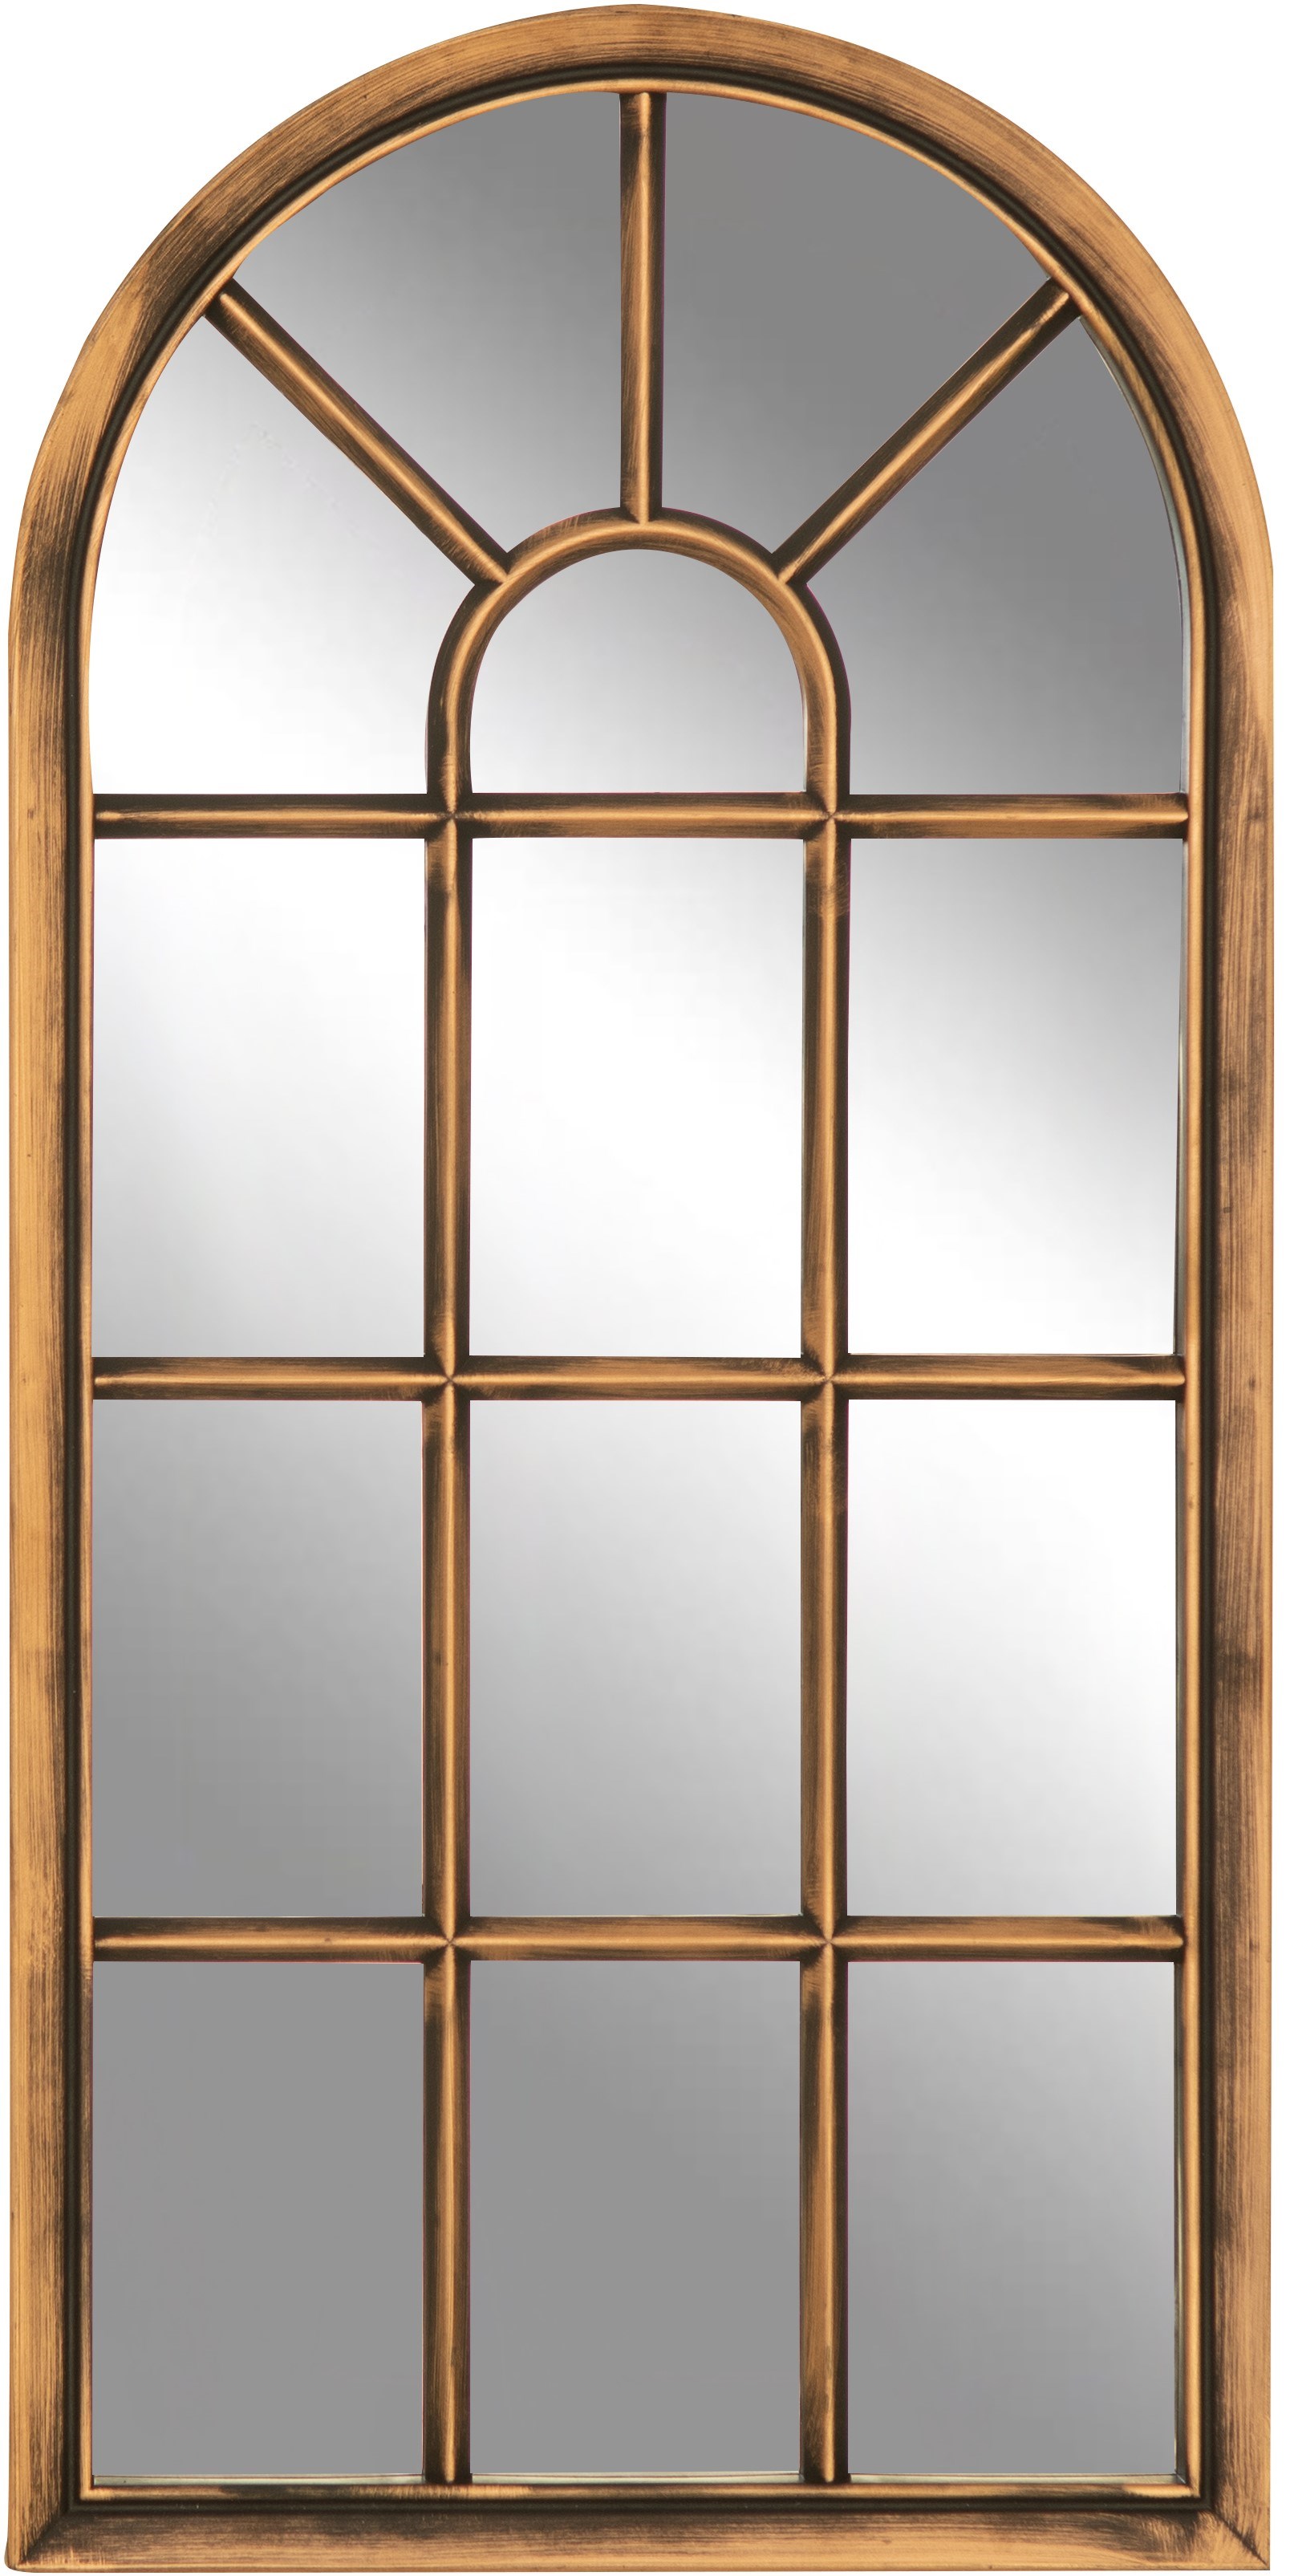 Modena Wall Mirror - Brushed Copper 35cm x 71cm